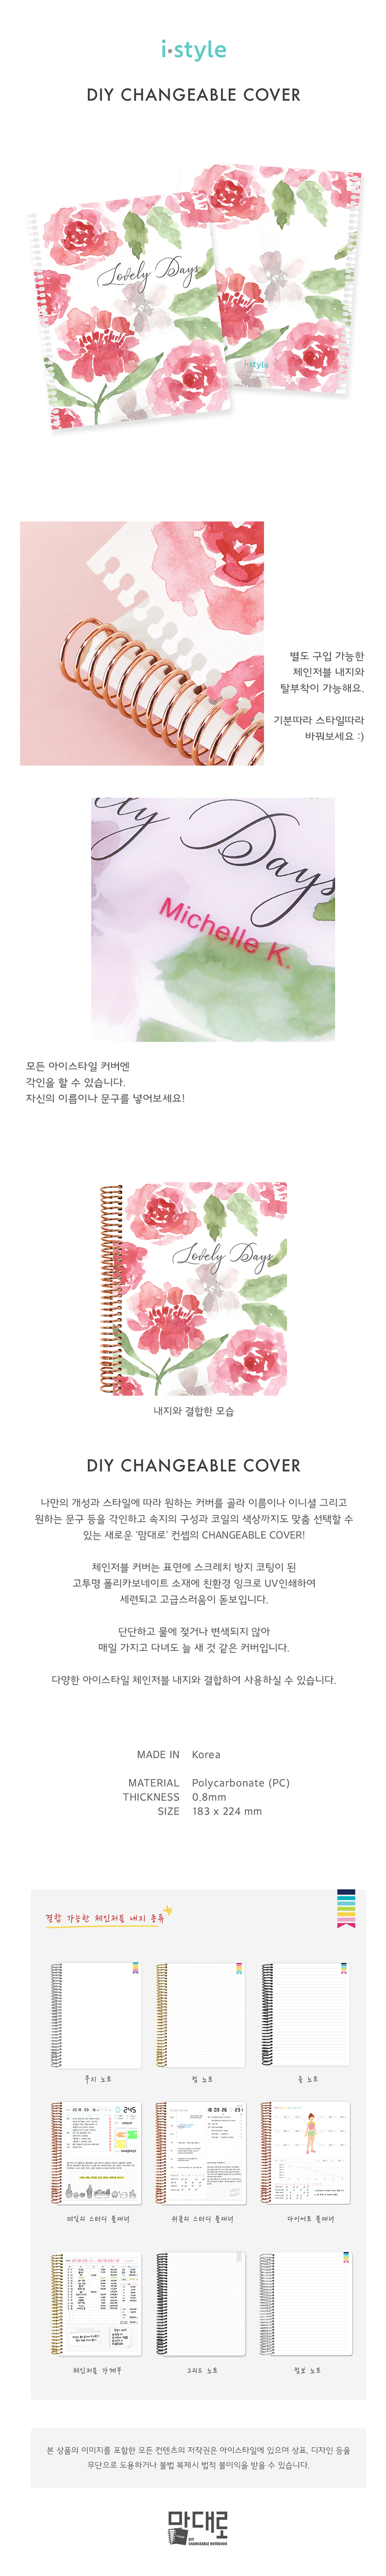 [iStyle]-Changeable-Cover-Only---Watercolor-Flower-NEW-900_153027.jpg